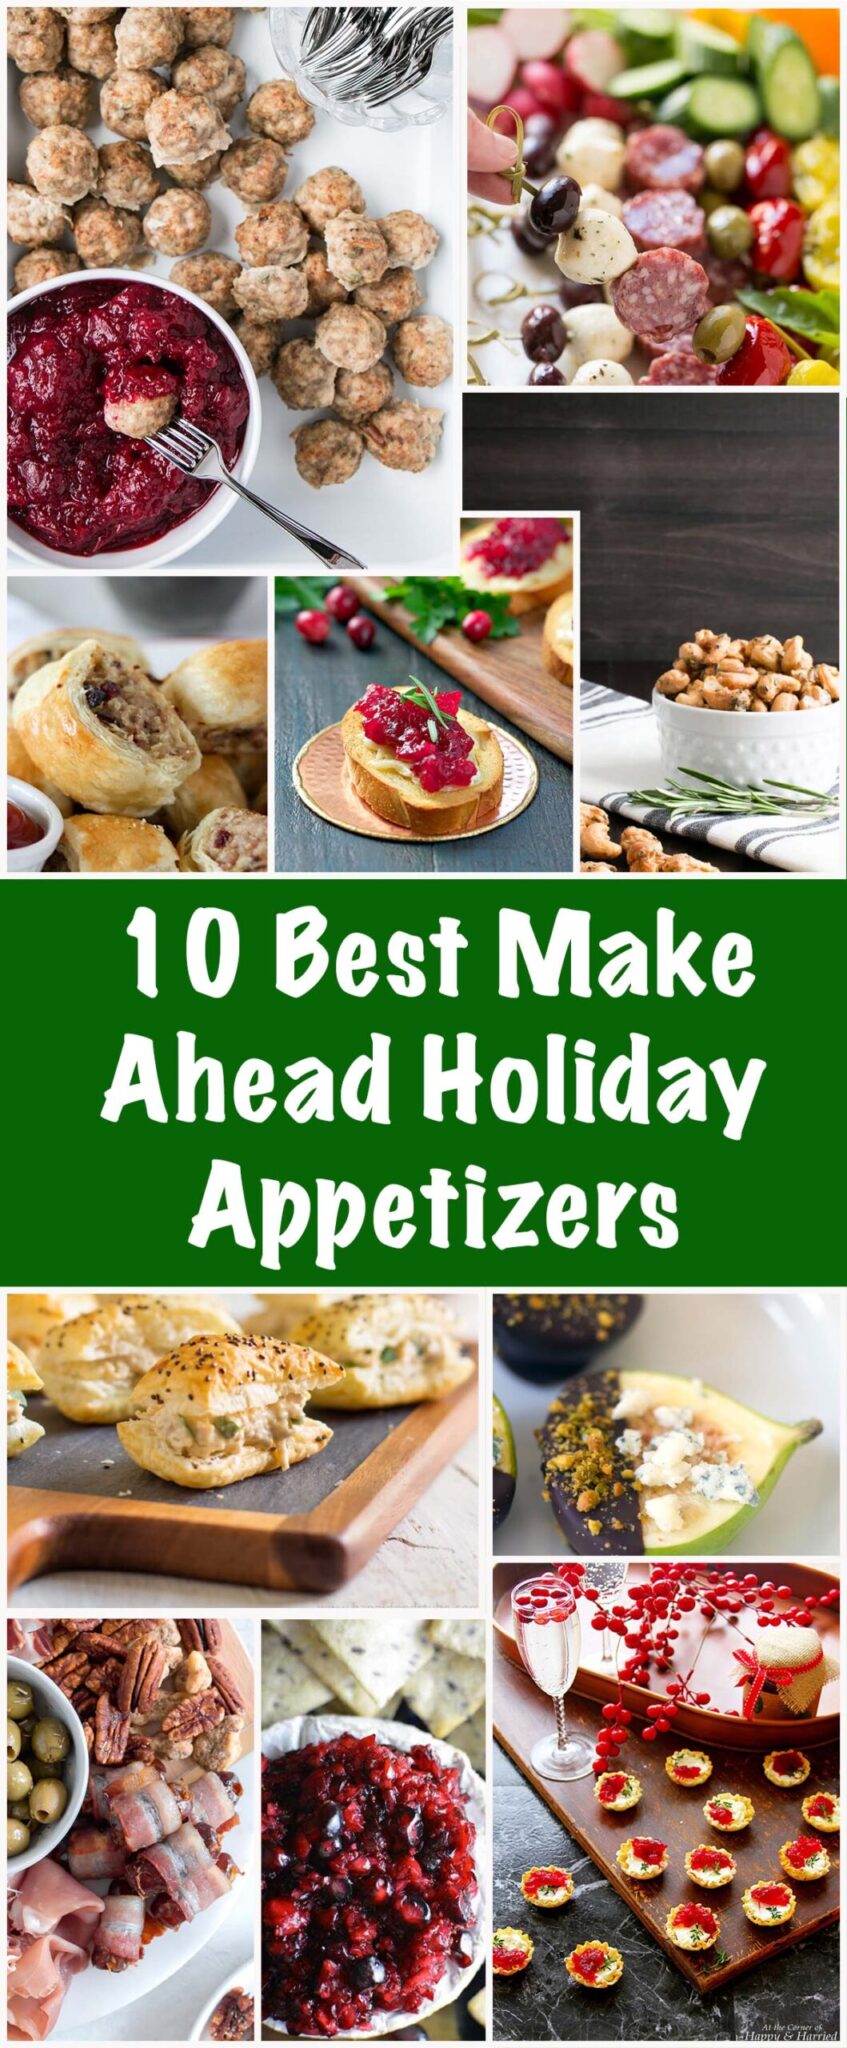 10 Best Make Ahead Holiday Appetizers